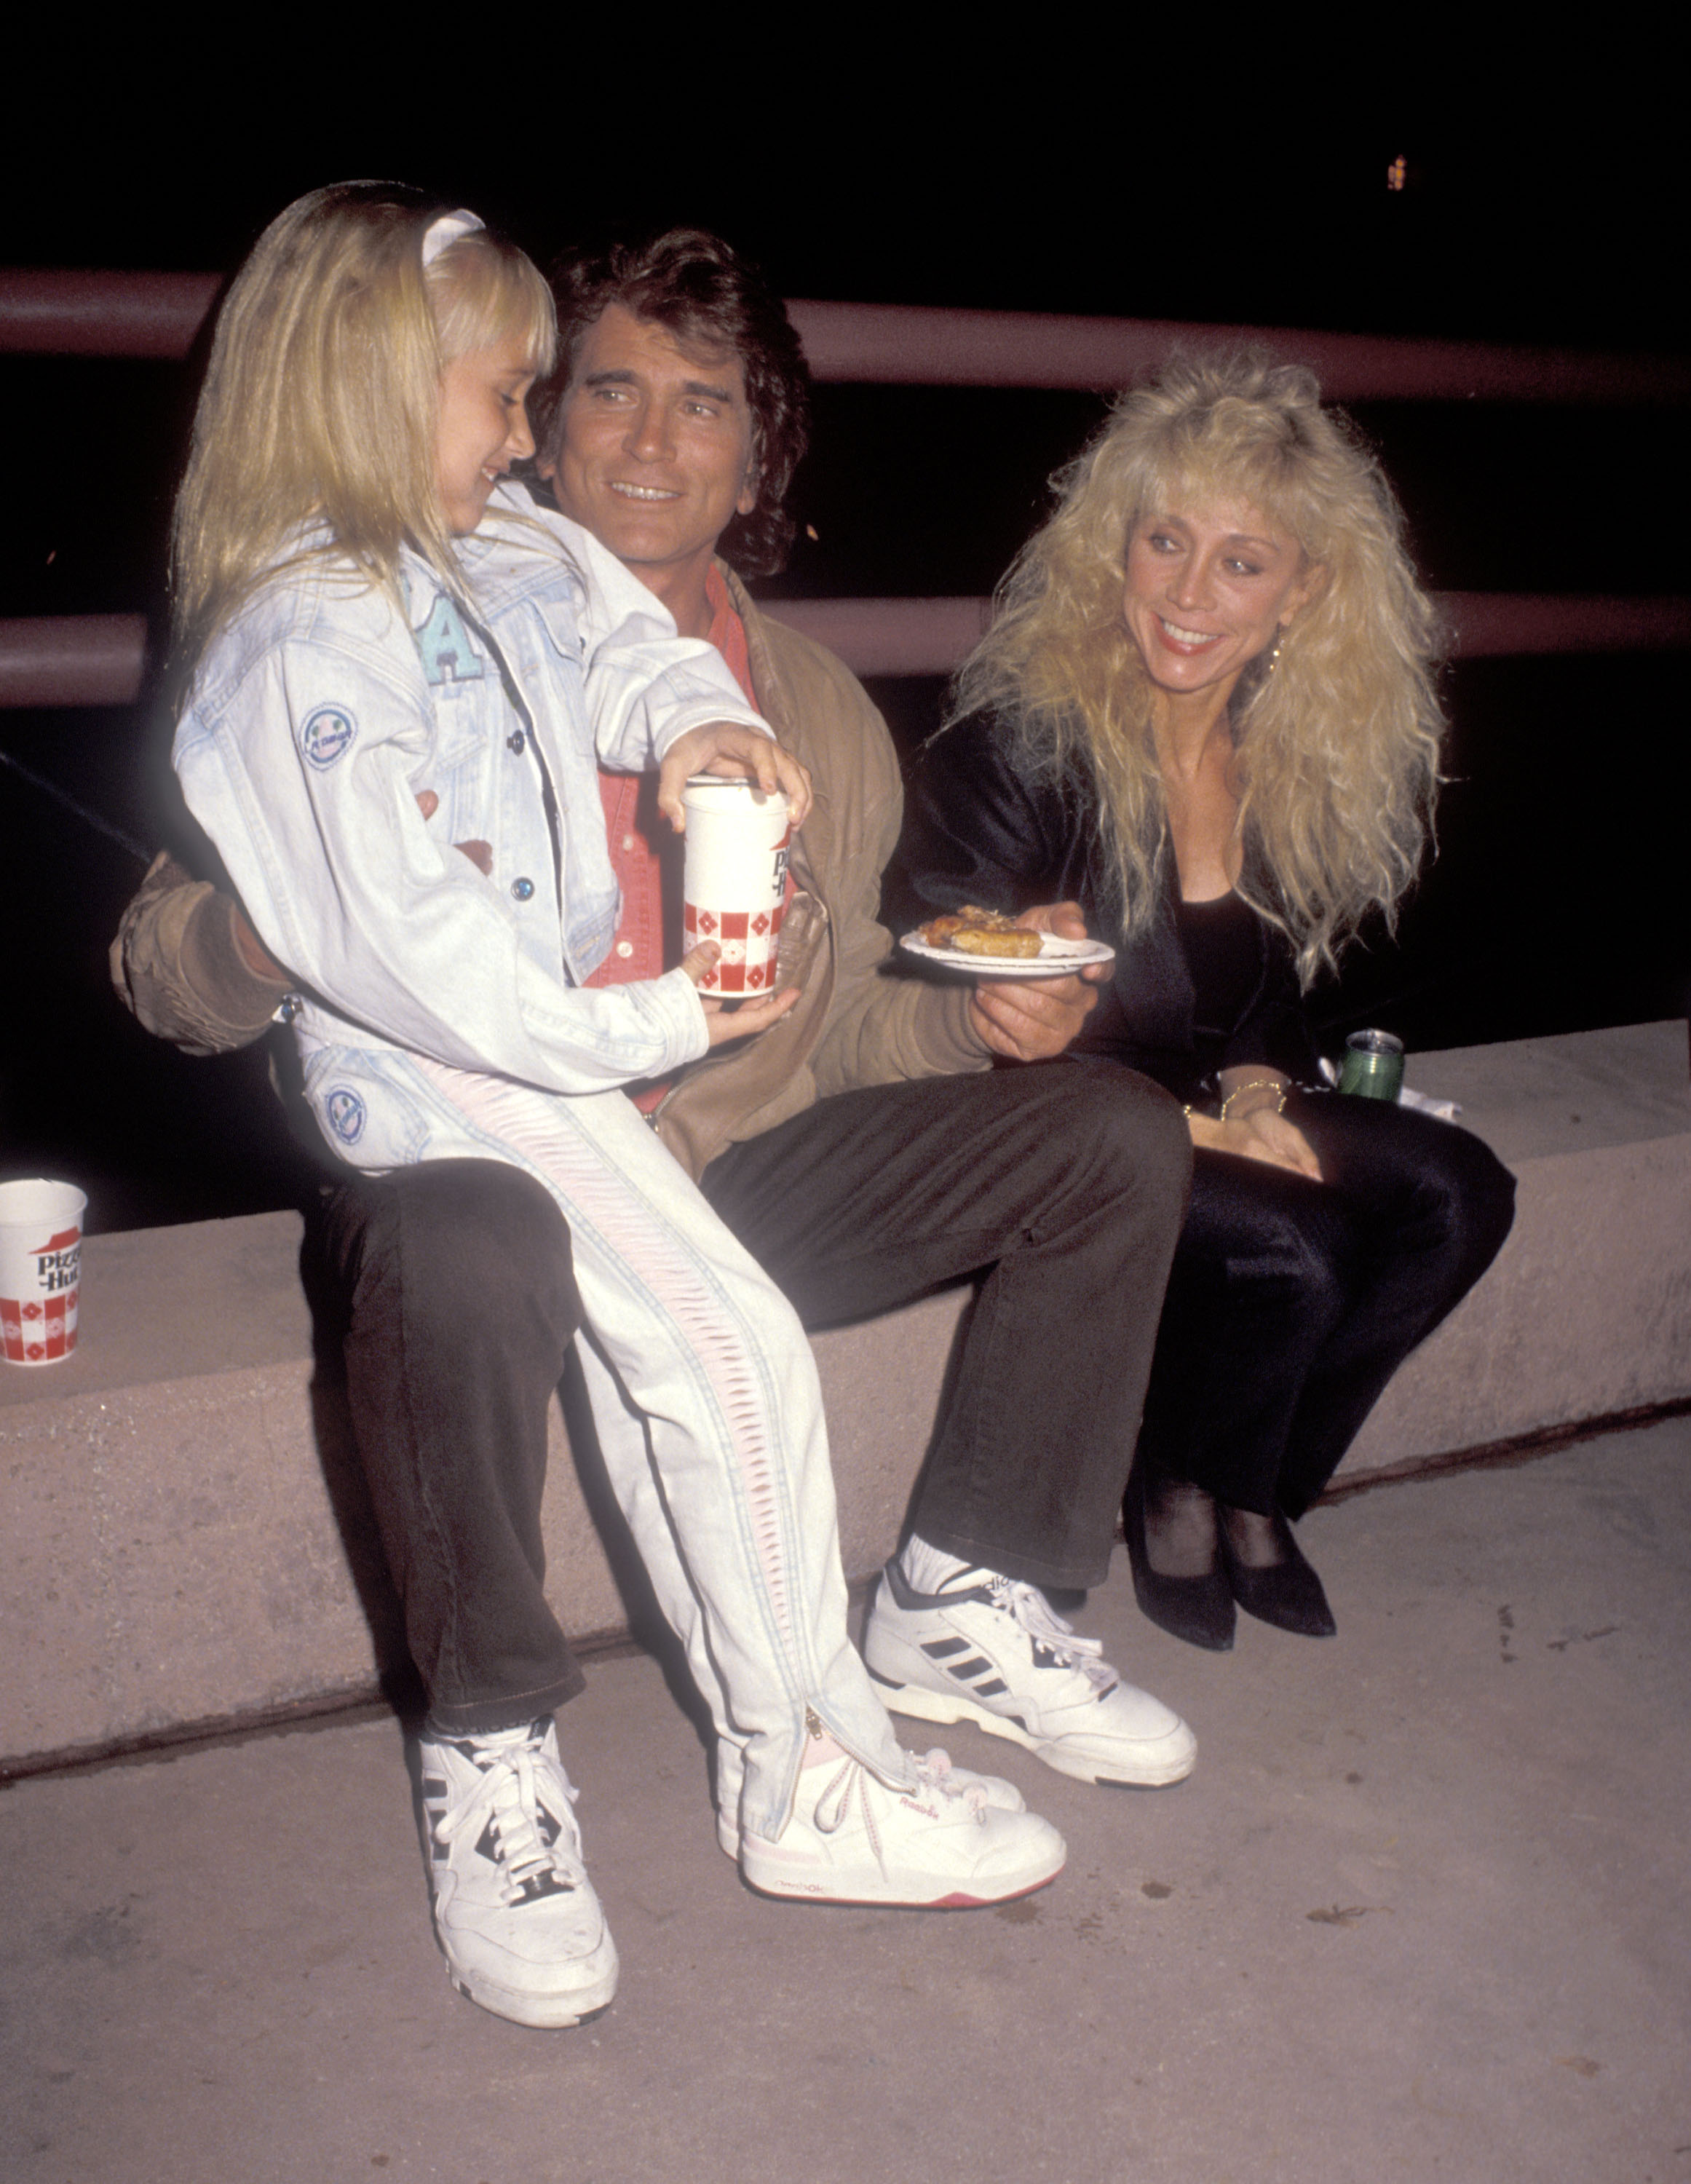 Michael Landon, Cindy Landon and their daughter Jennifer Landon are pictured at the "Teenage Mutant Ninja Turtles: Coming Out of Their Shells" Concert and Theatrical Performance on November 21, 1990, at Universal Amphitheatre in Univeral City, California | Source: Getty Images